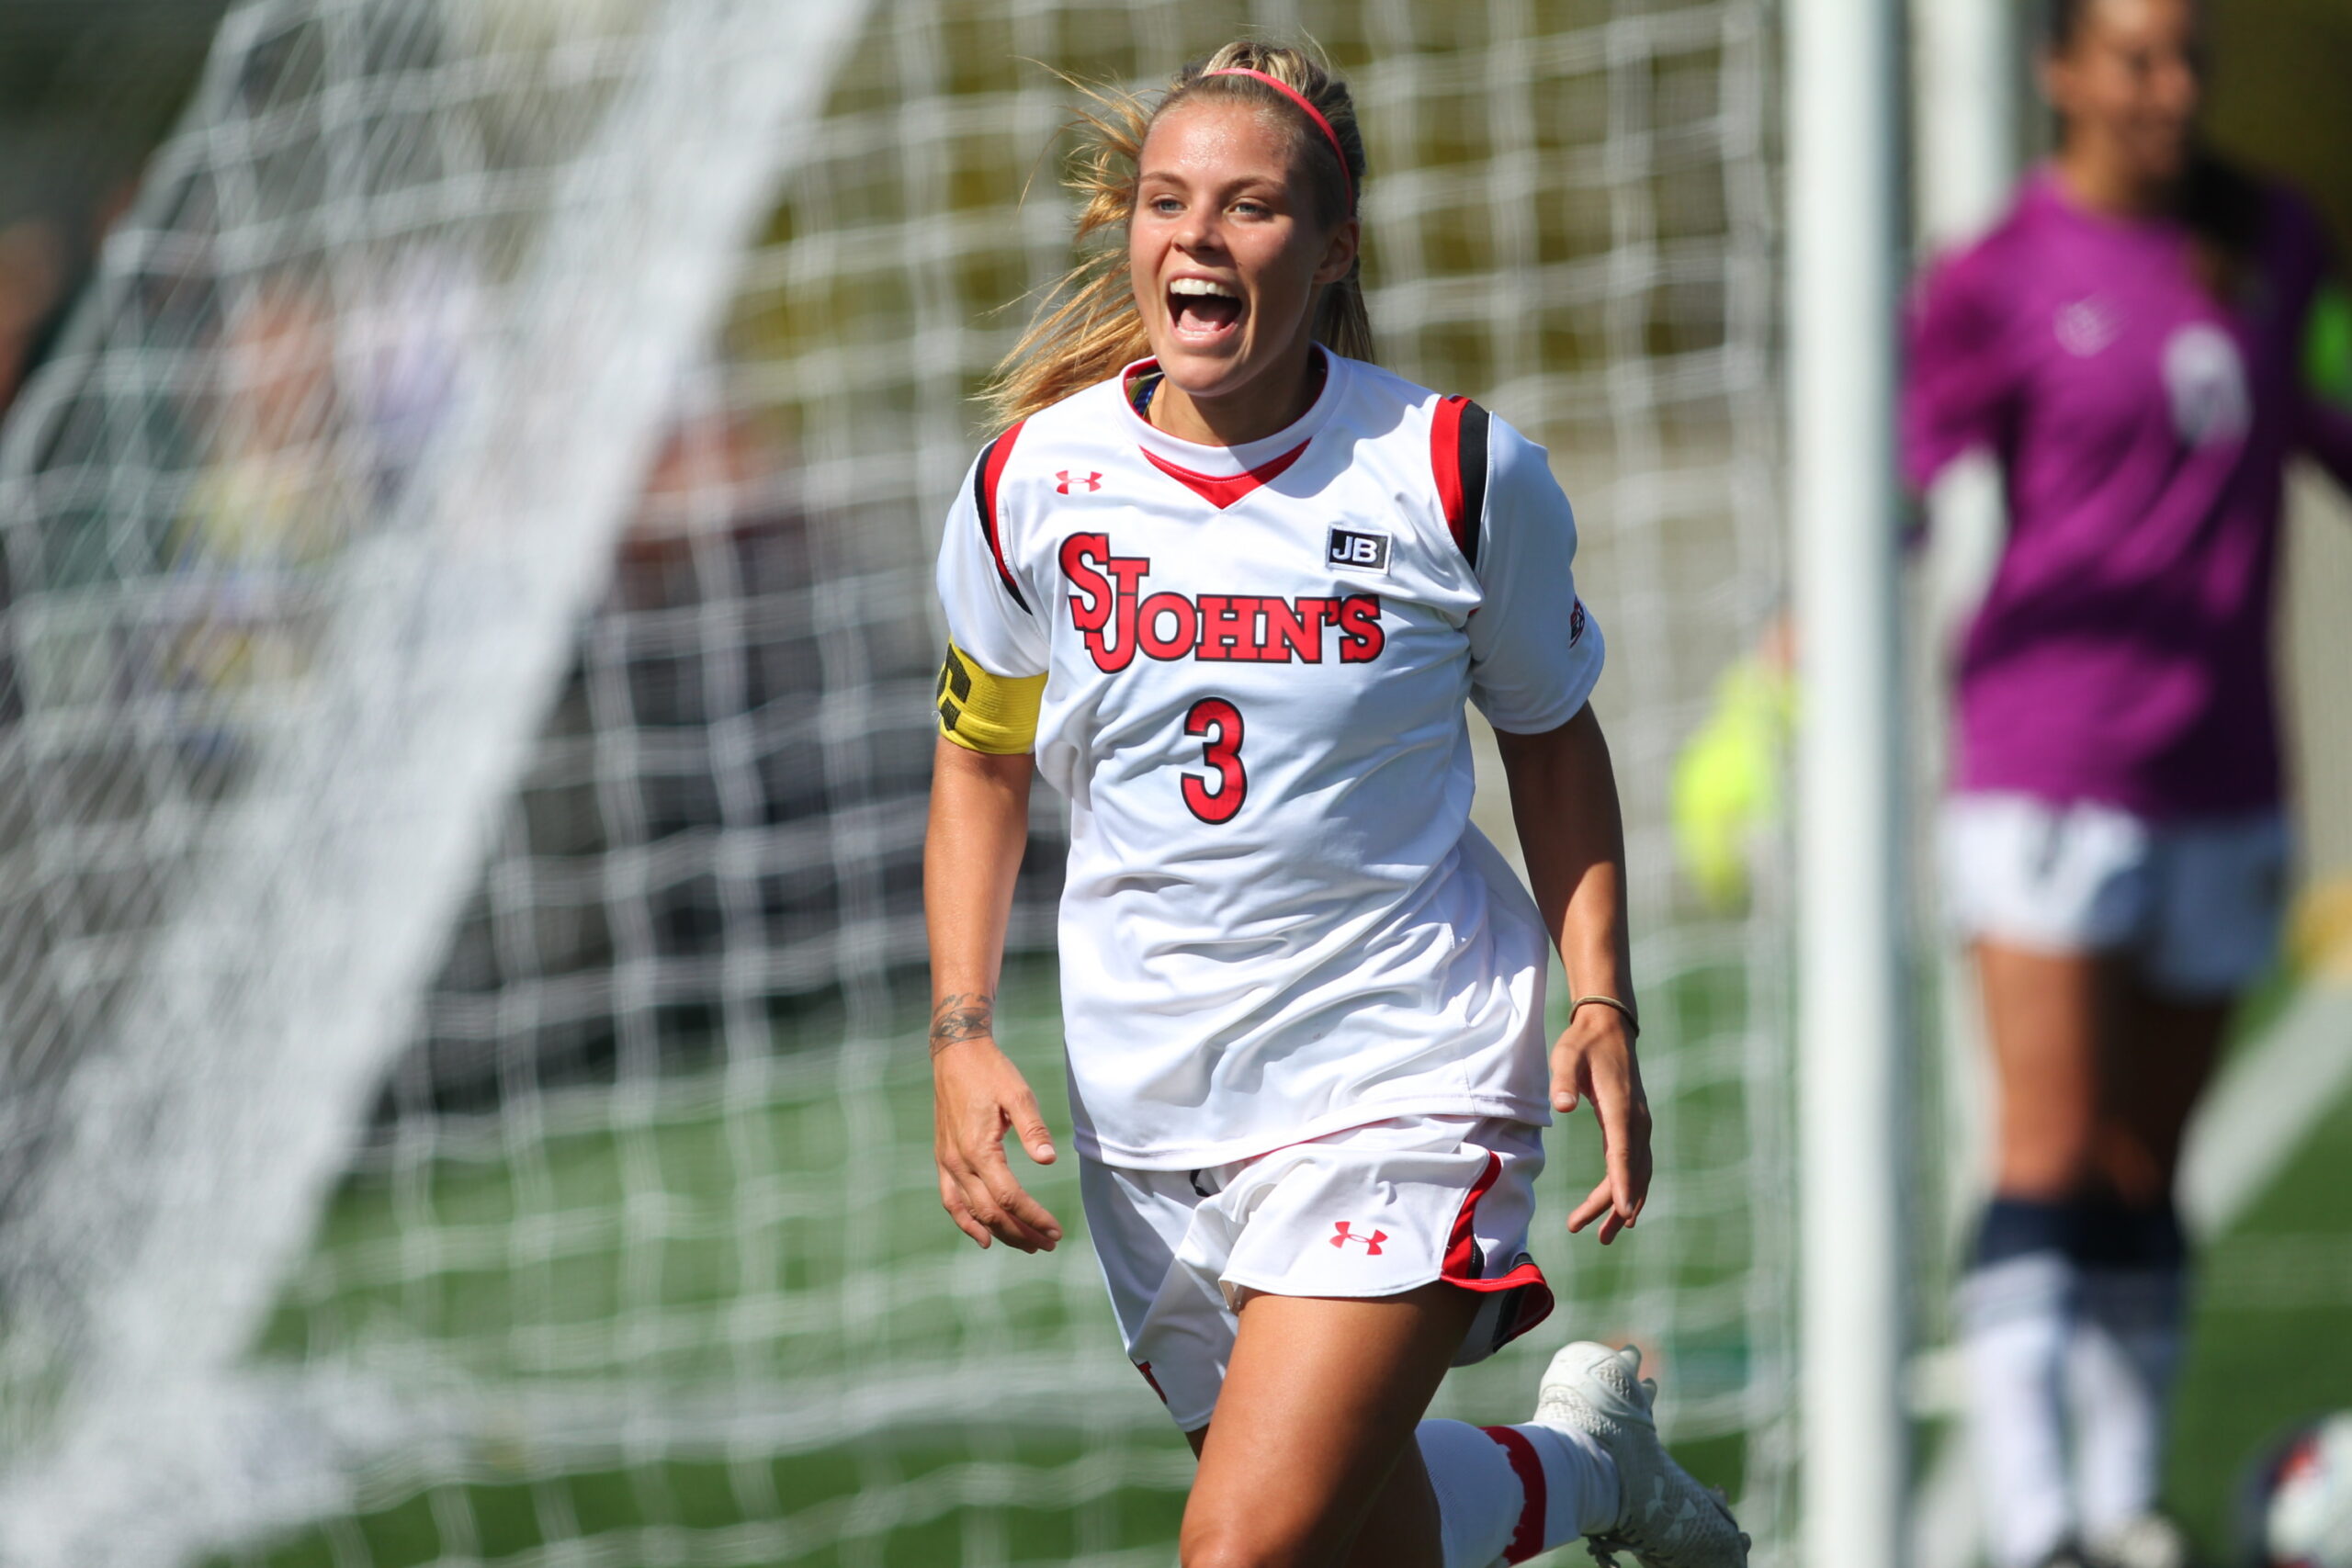 From College to Pro: Rachel Daly